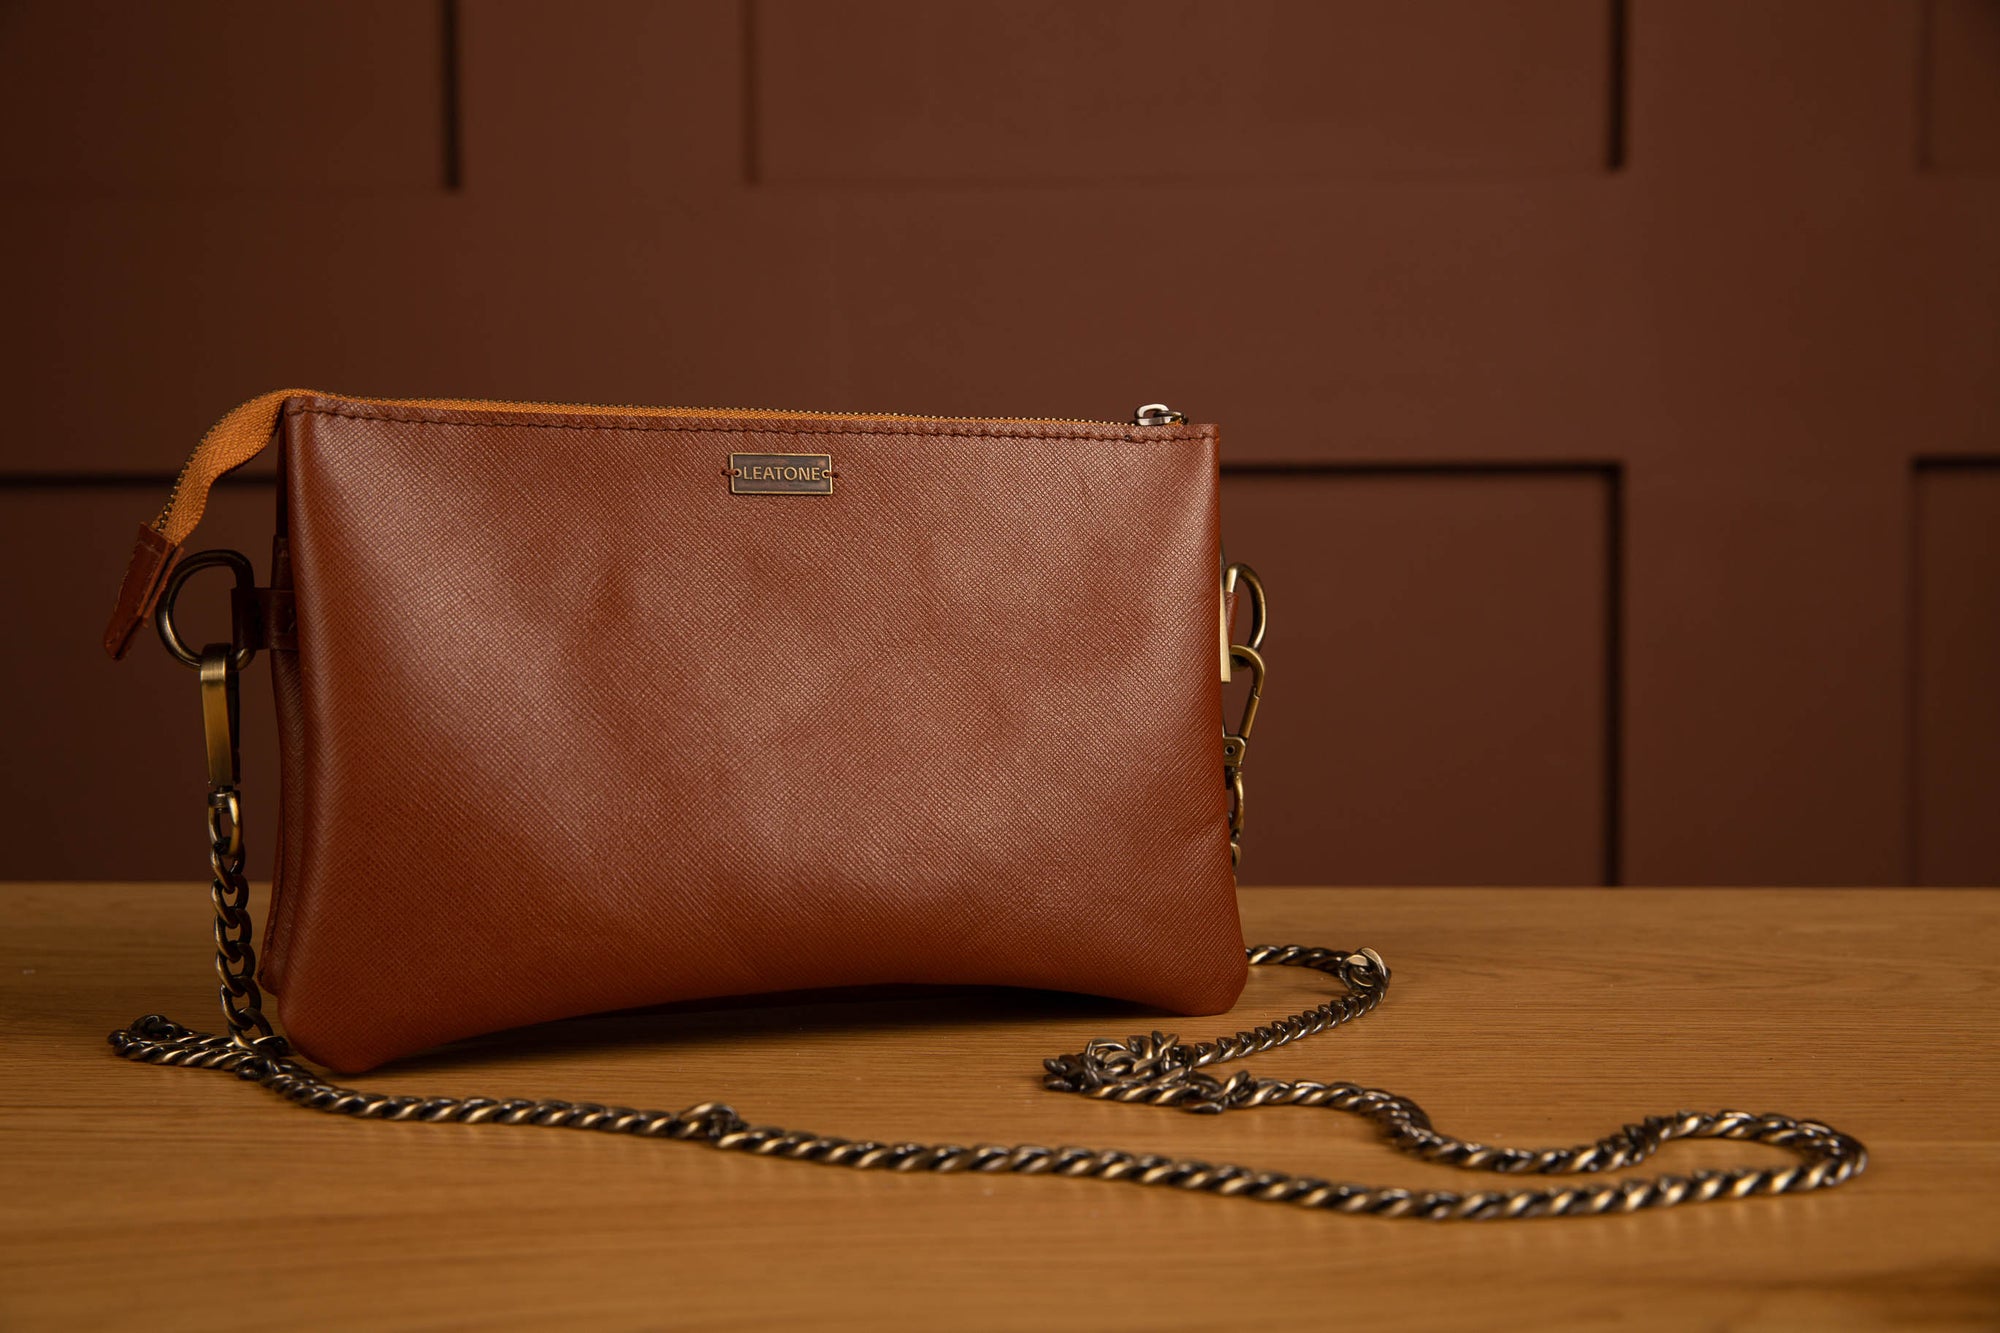 Leatone Women's clutch bag "Claire" in whiskey color